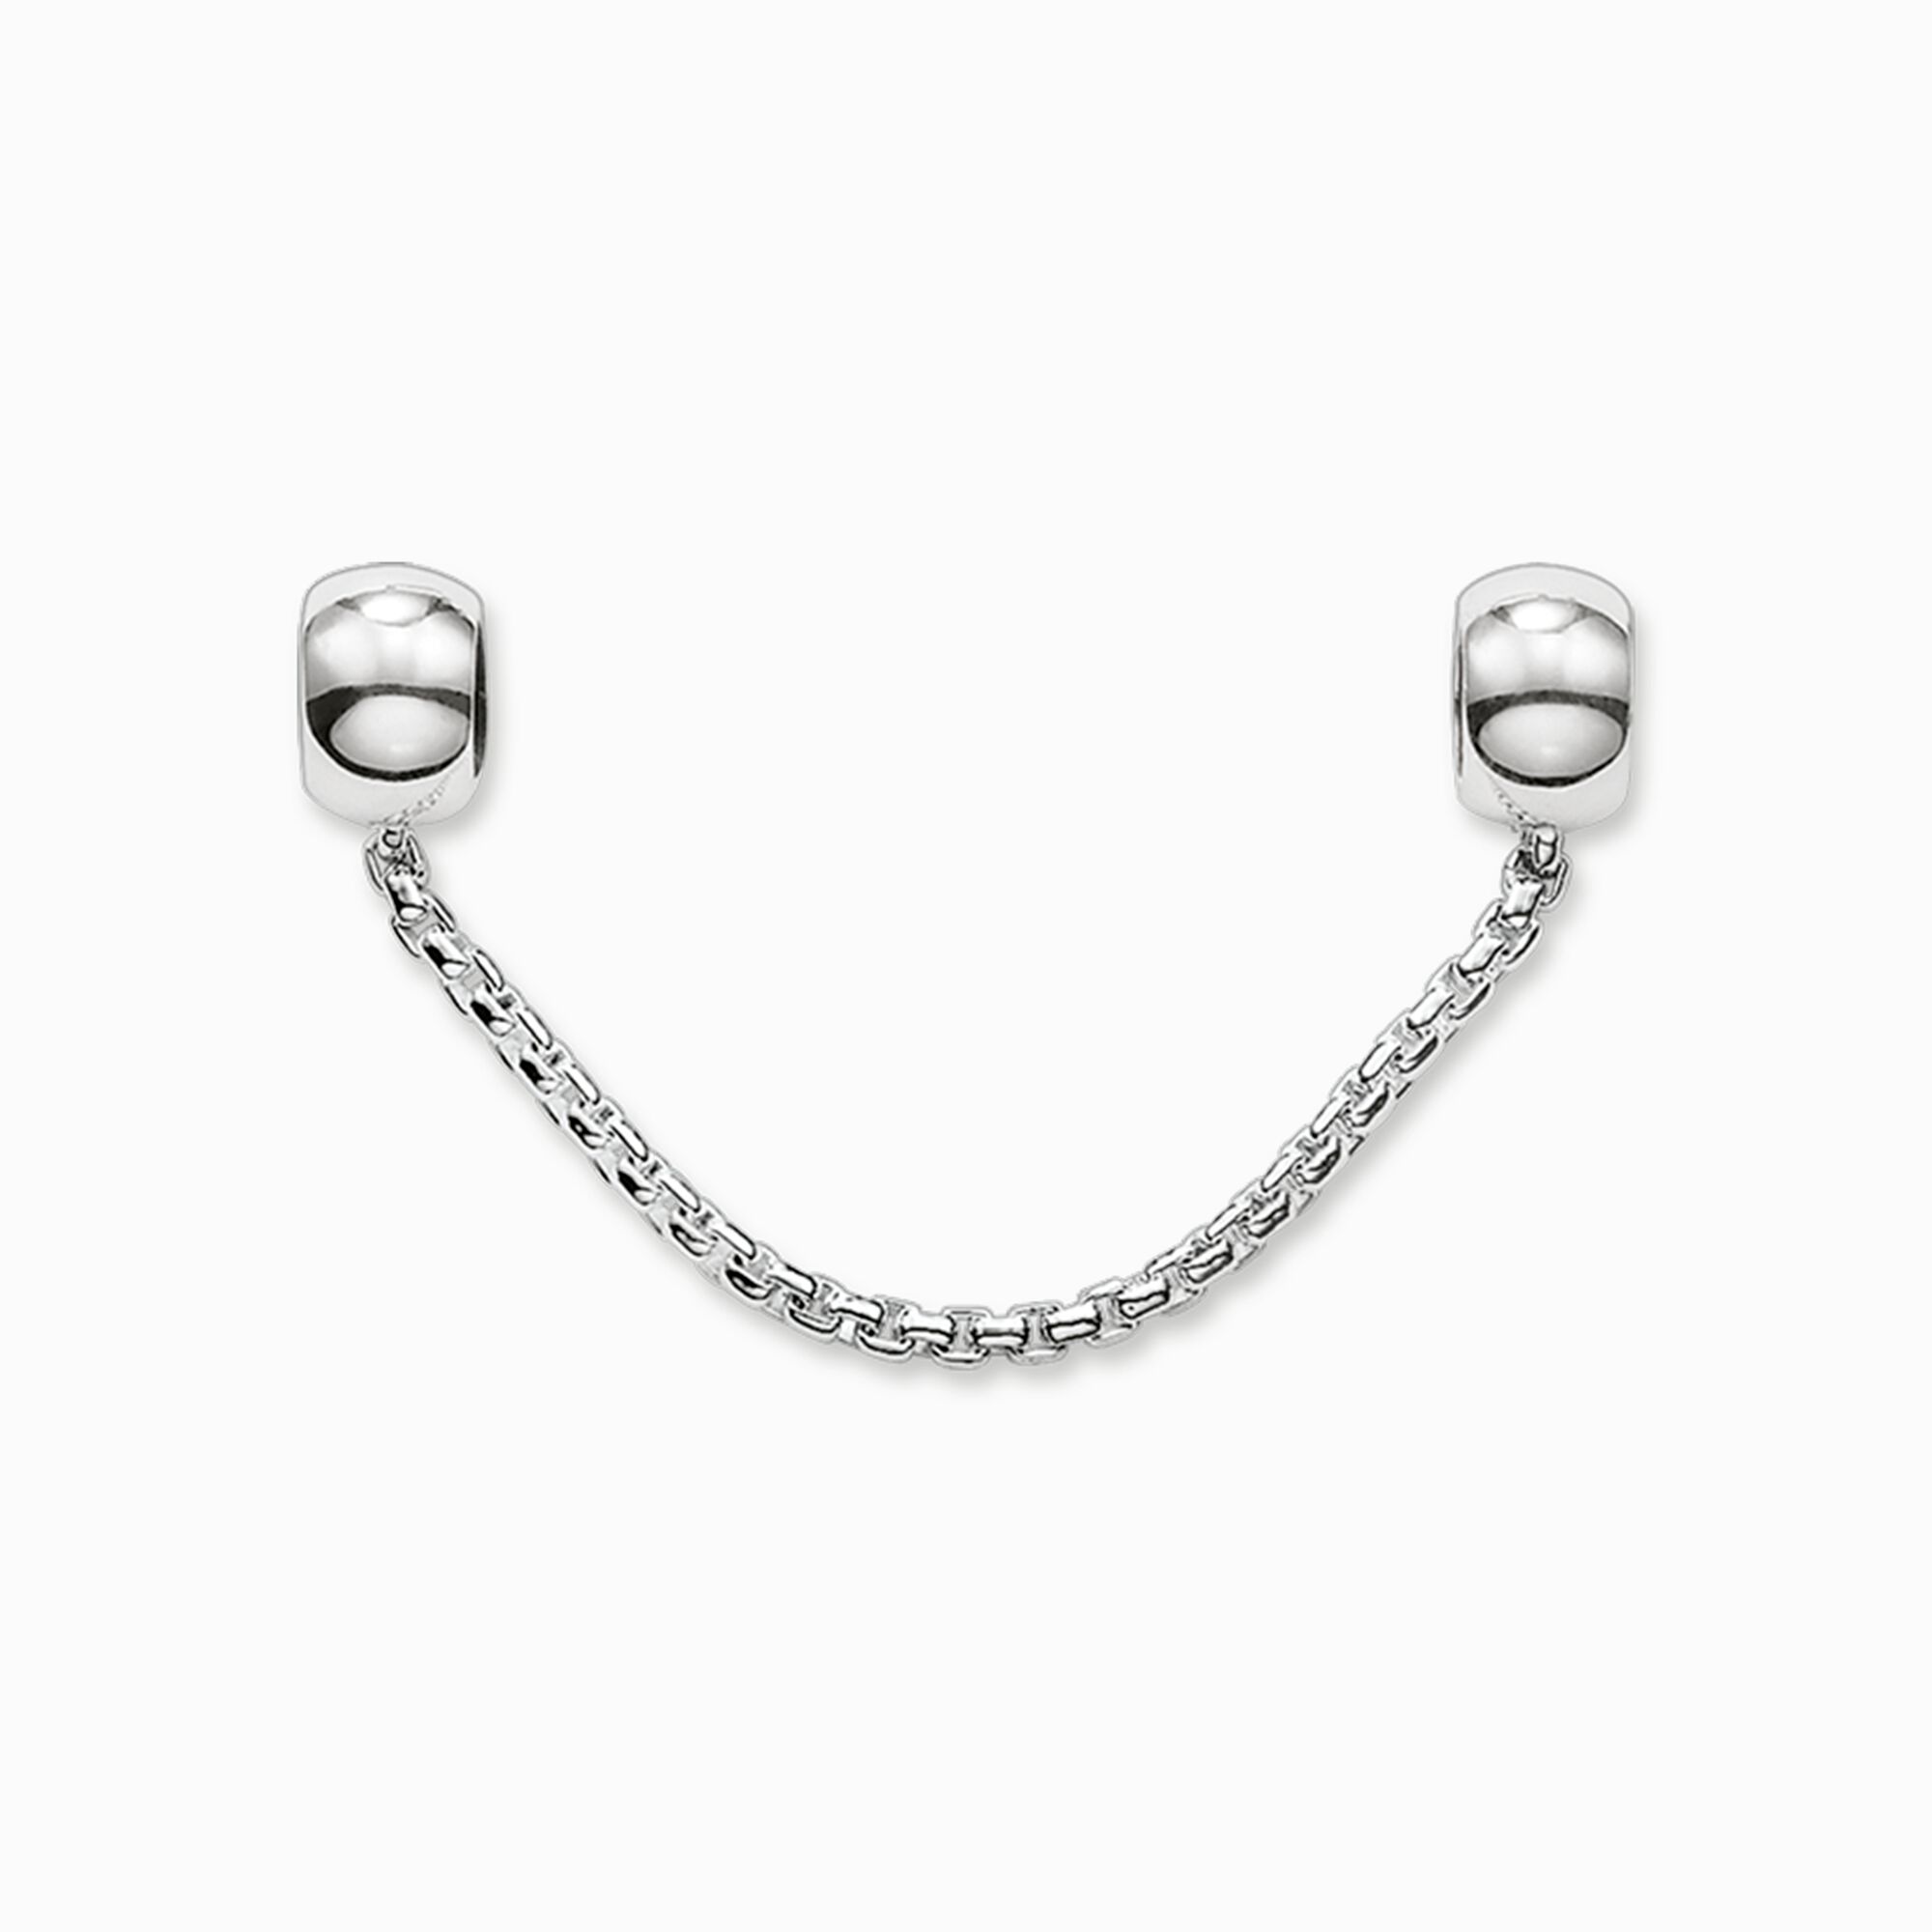 Safety chain classic from the Karma Beads collection in the THOMAS SABO online store